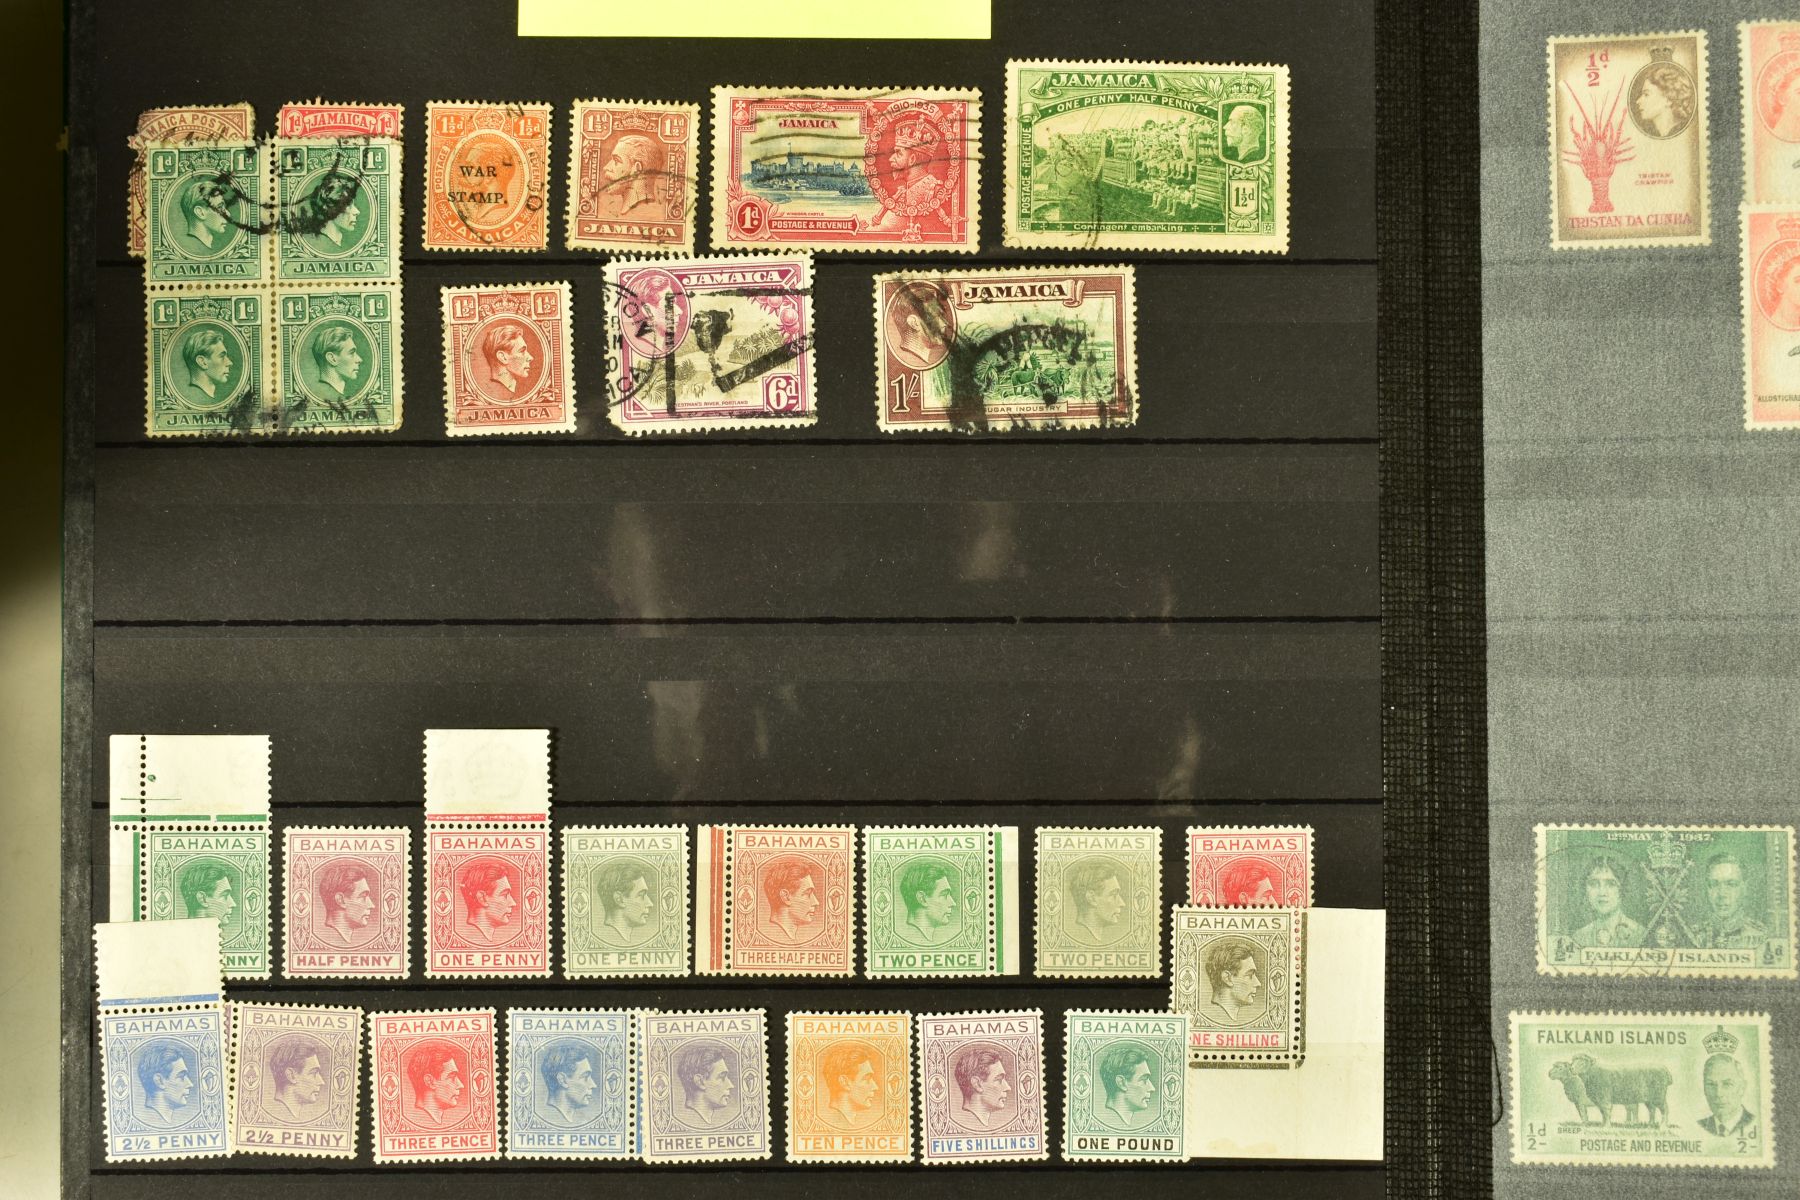 A LARGE BOX OF STAMPS in 19 albums includes GB QV to QEII collections, Commonwealth fiscals/ - Image 11 of 17